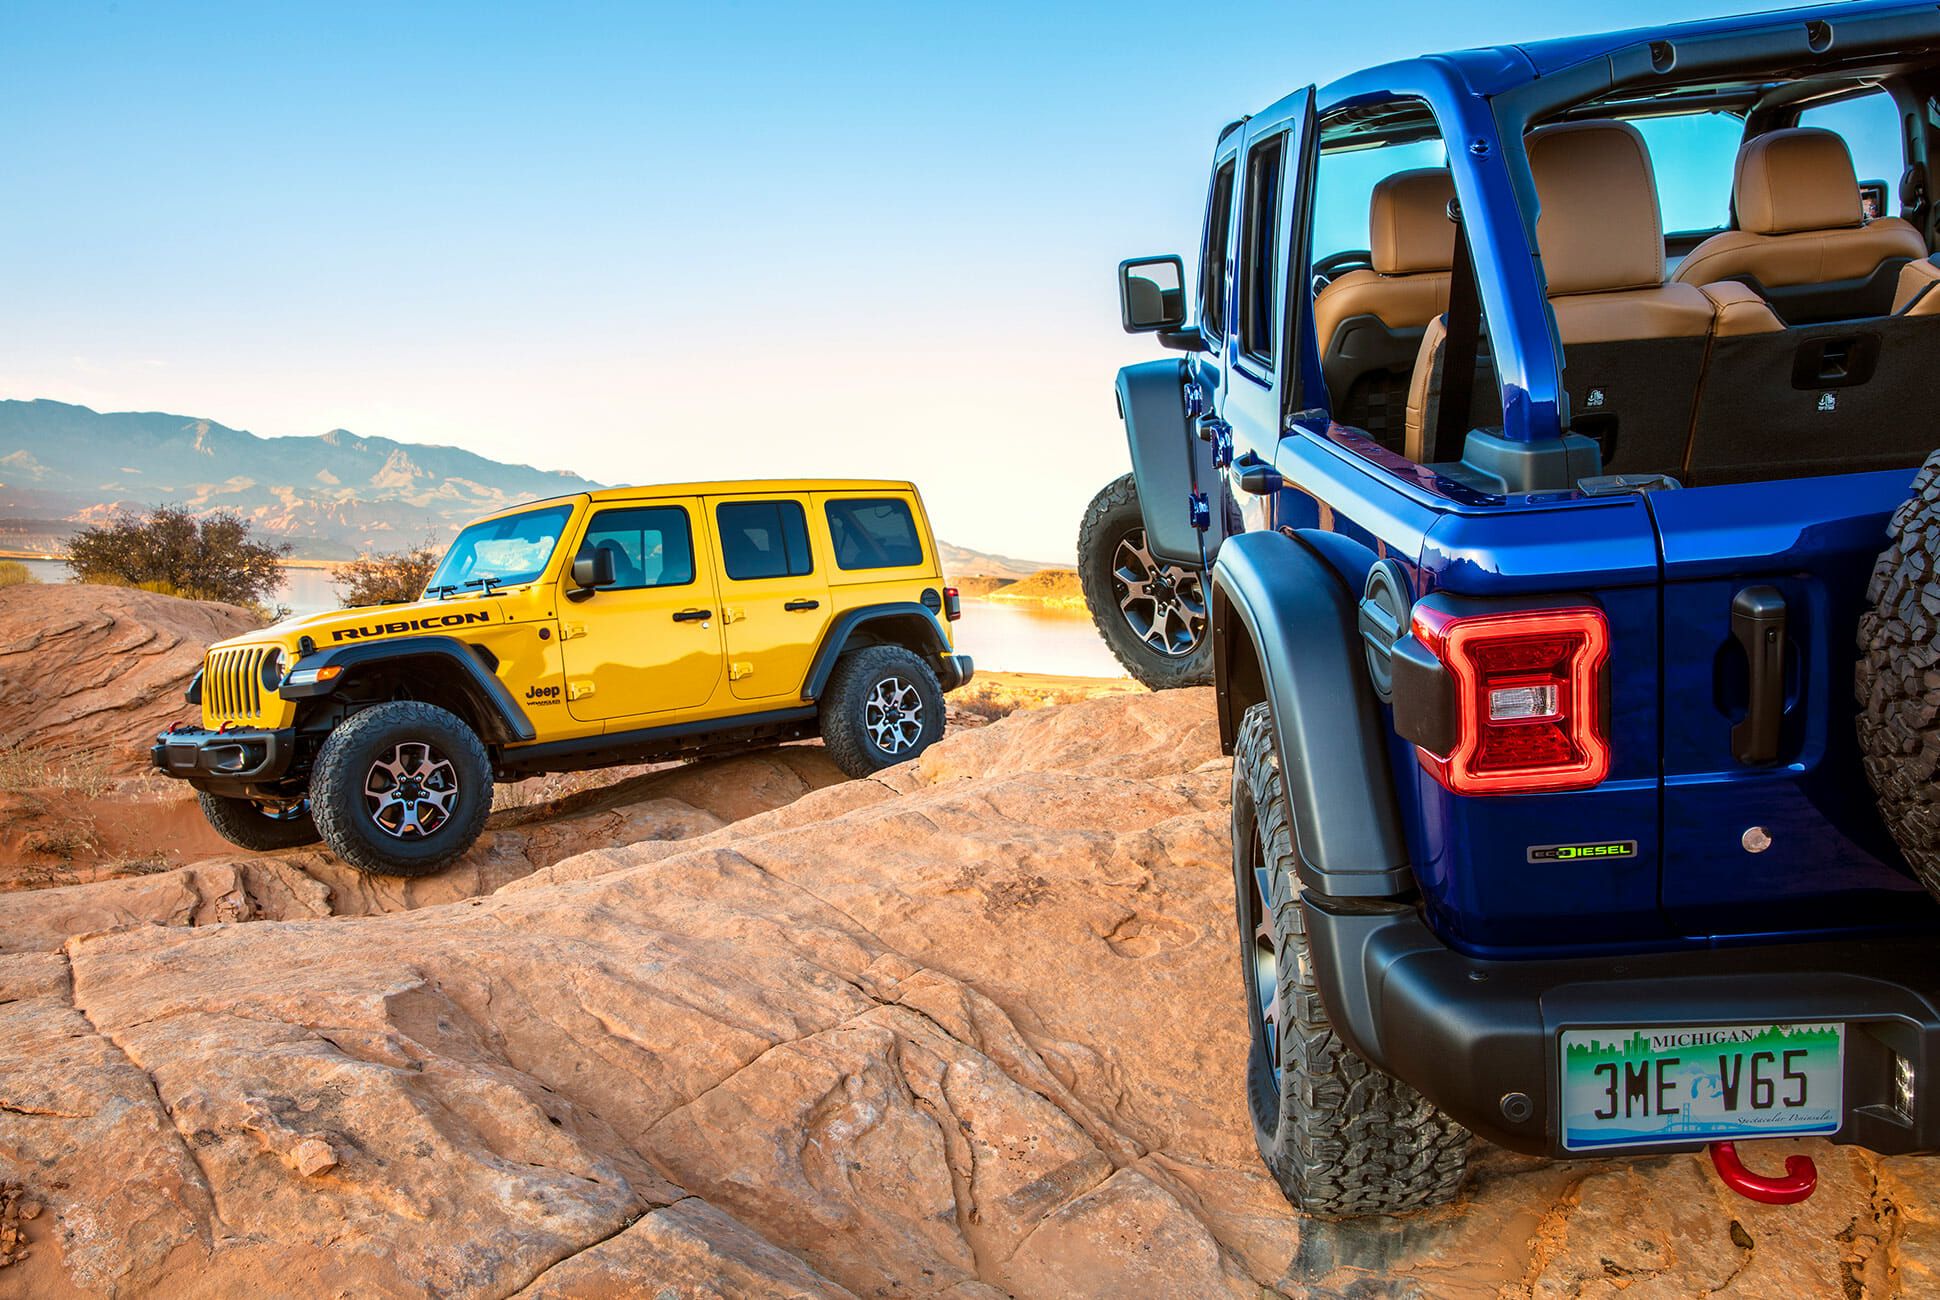 2020 Jeep Wrangler EcoDiesel Review: Worth Every Penny • Gear Patrol